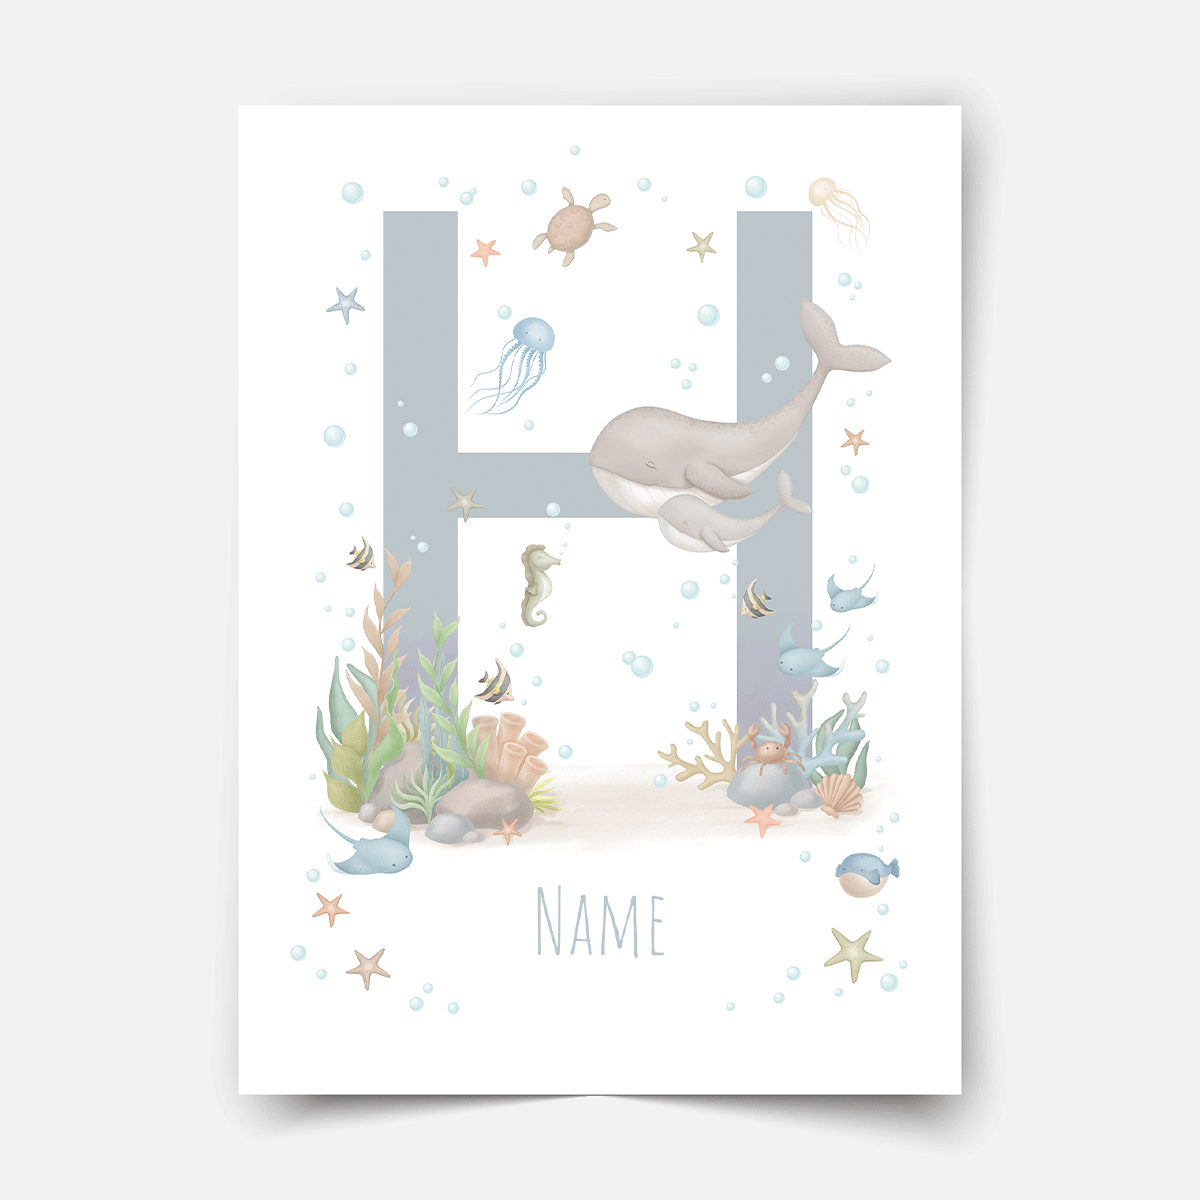 Personalised print - ABC Letters - Magical ocean (blue)